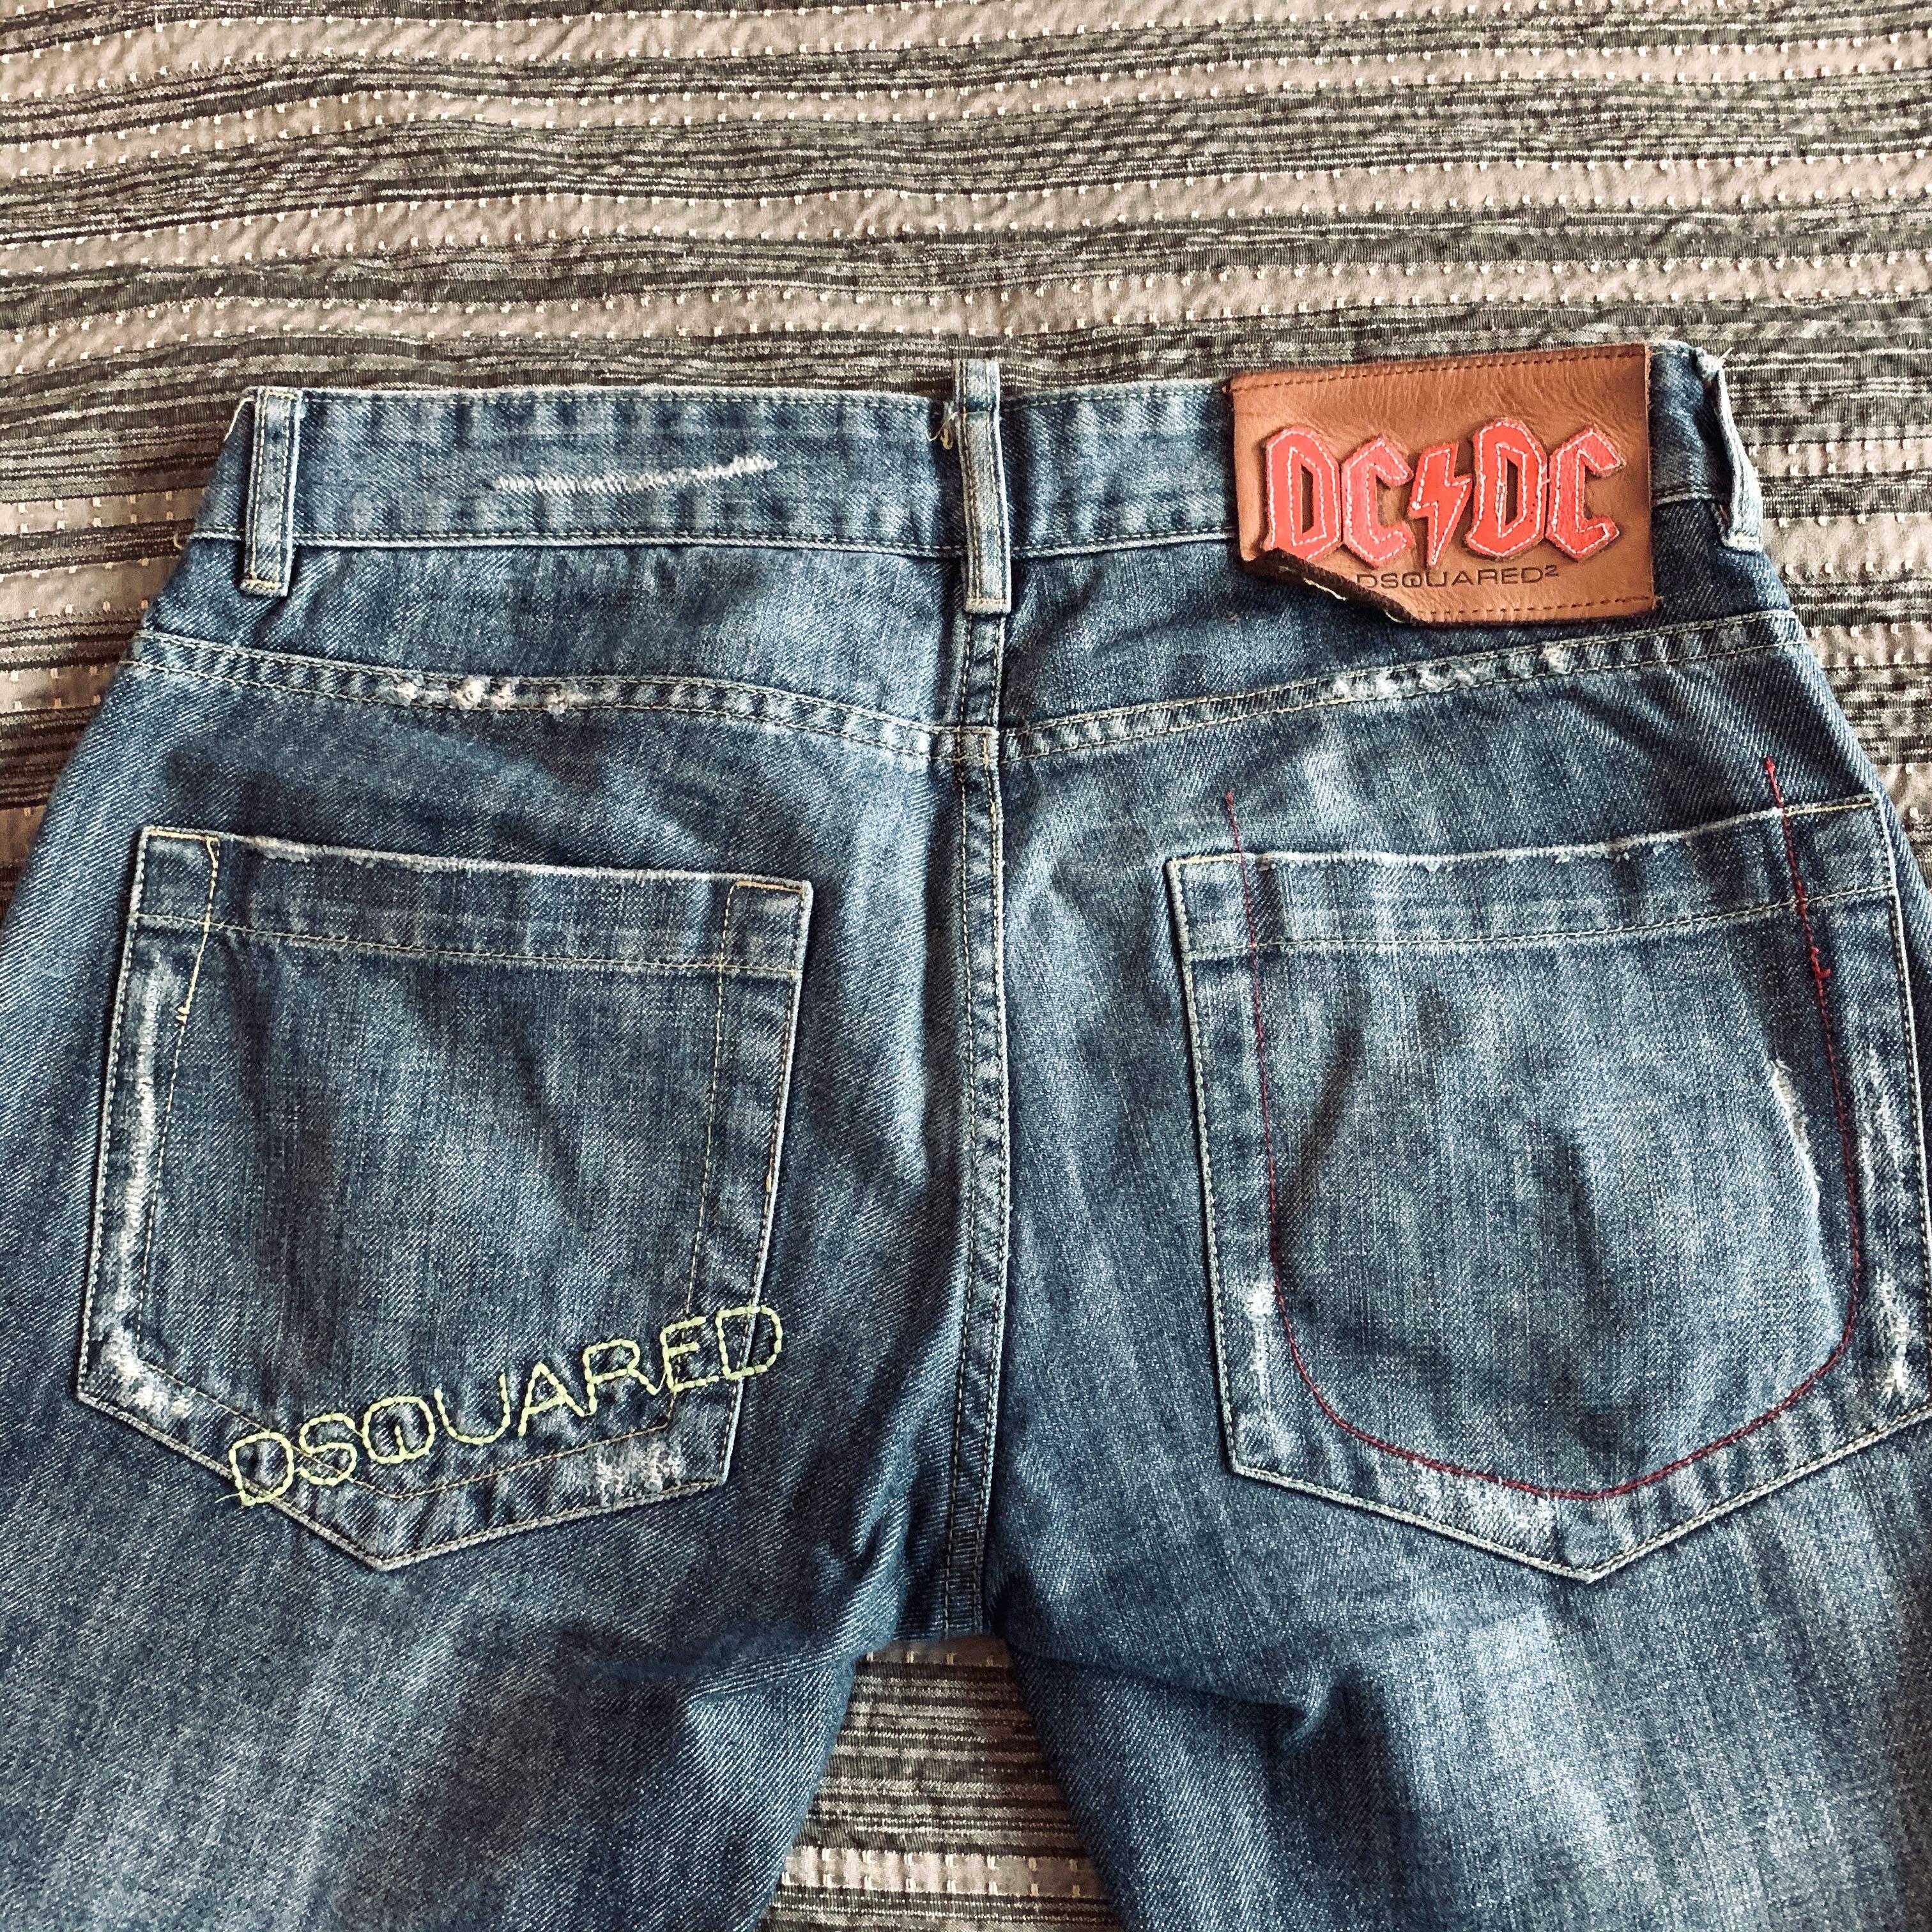 dsquared jeans size